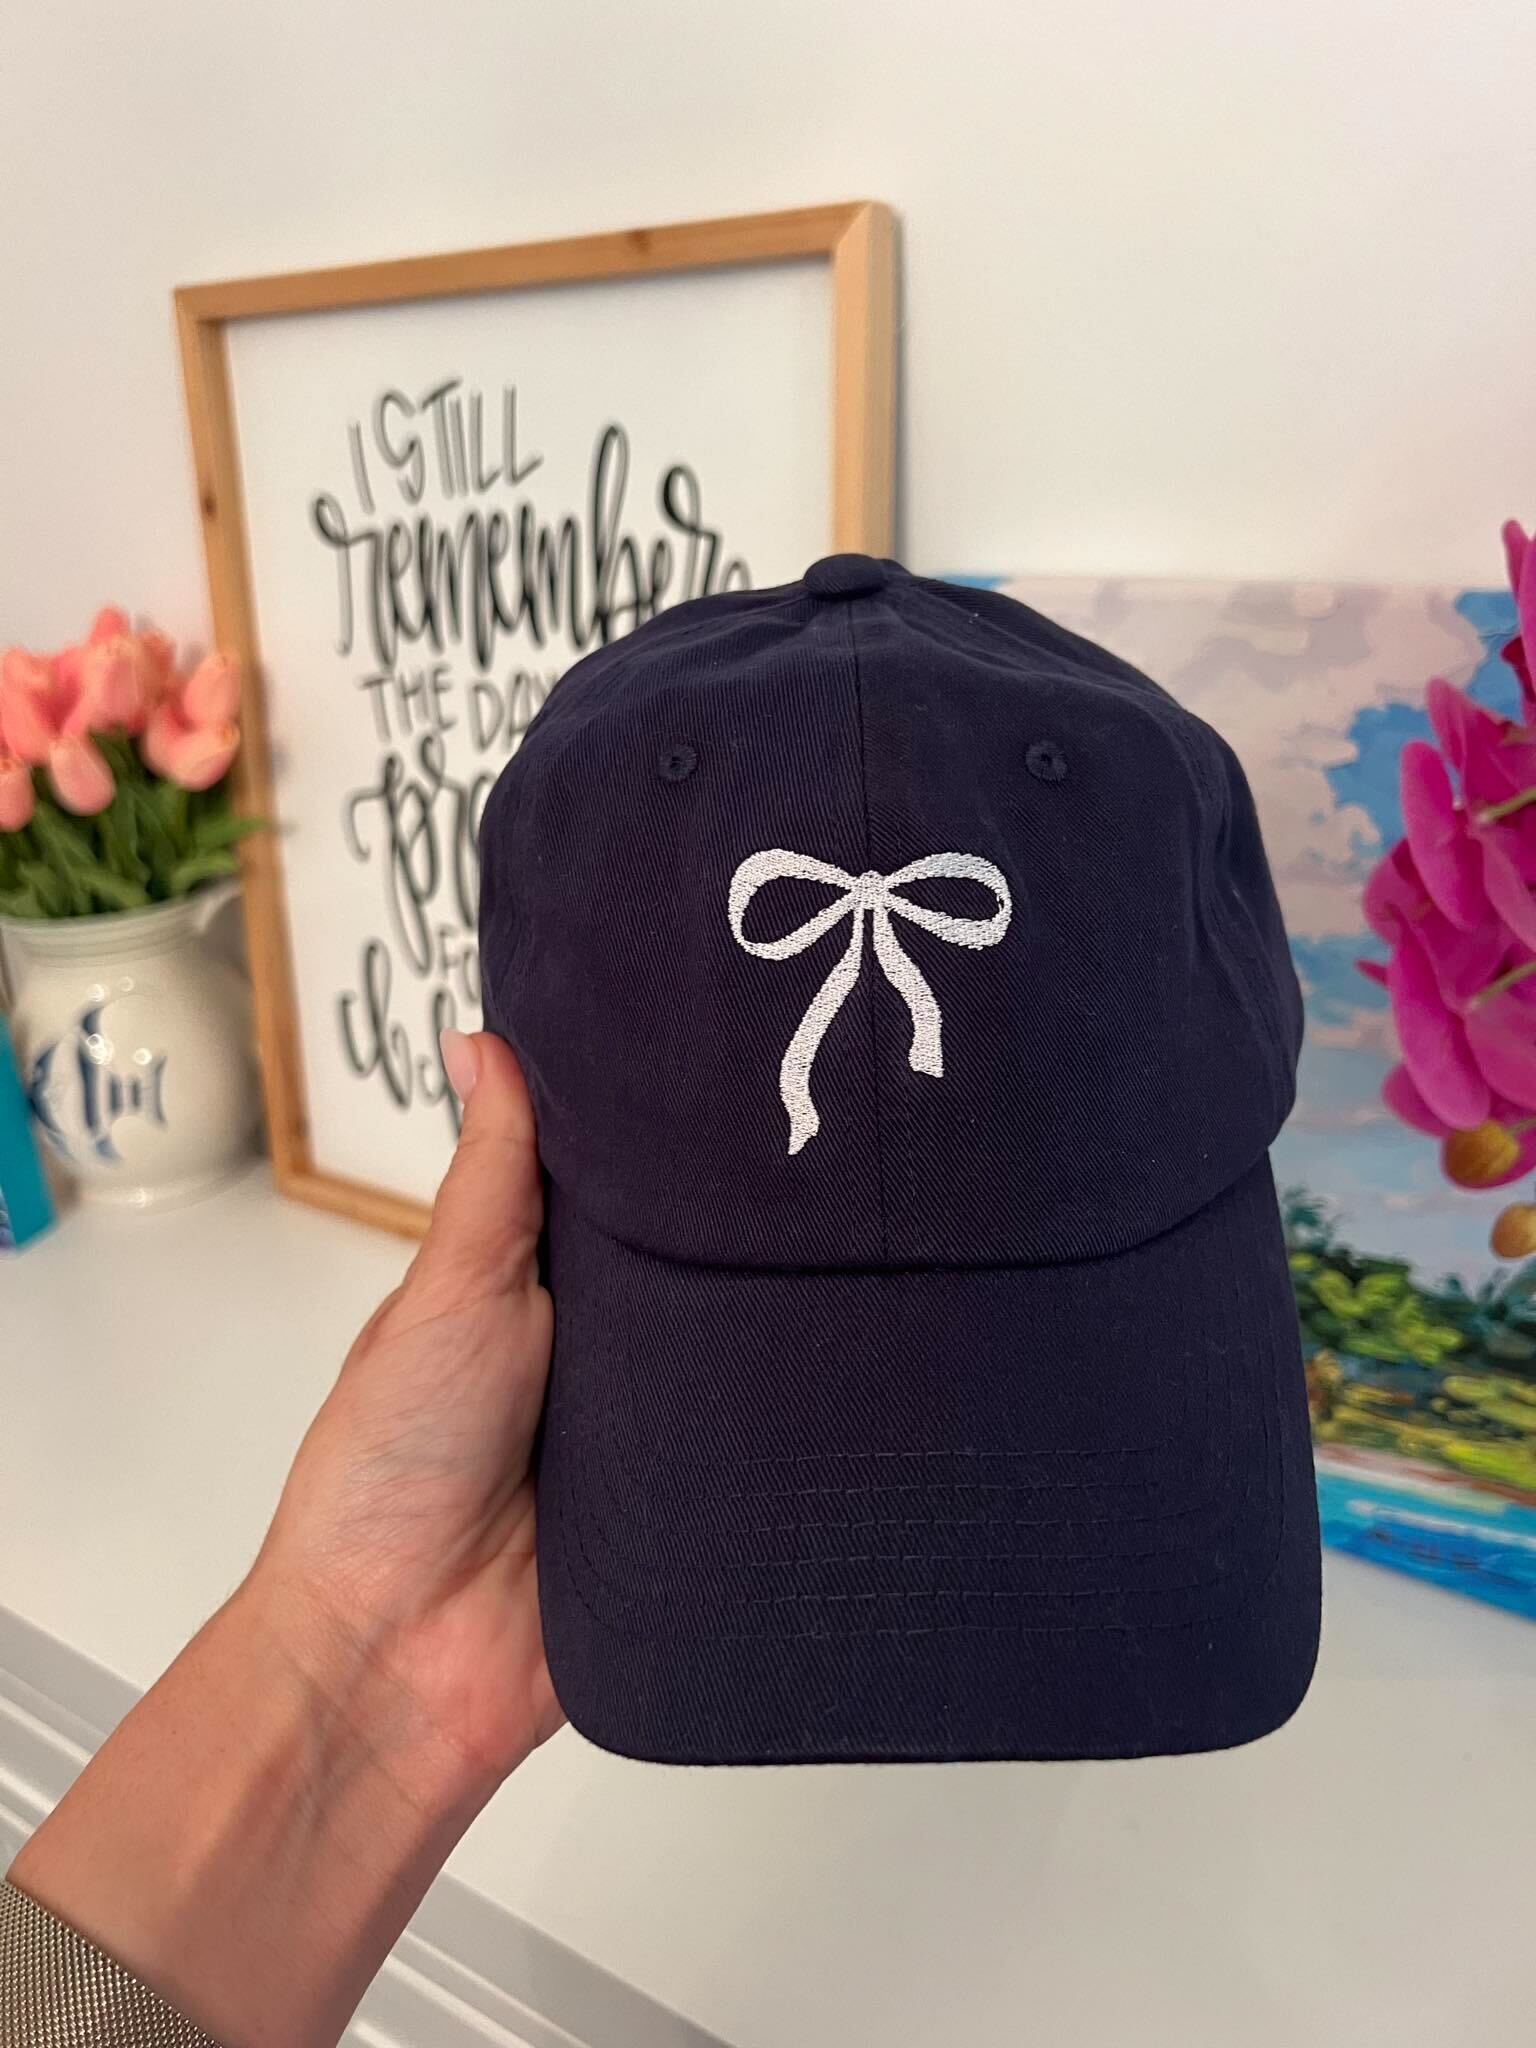 Bow Navy Cap (Ships in 1-2 Weeks)